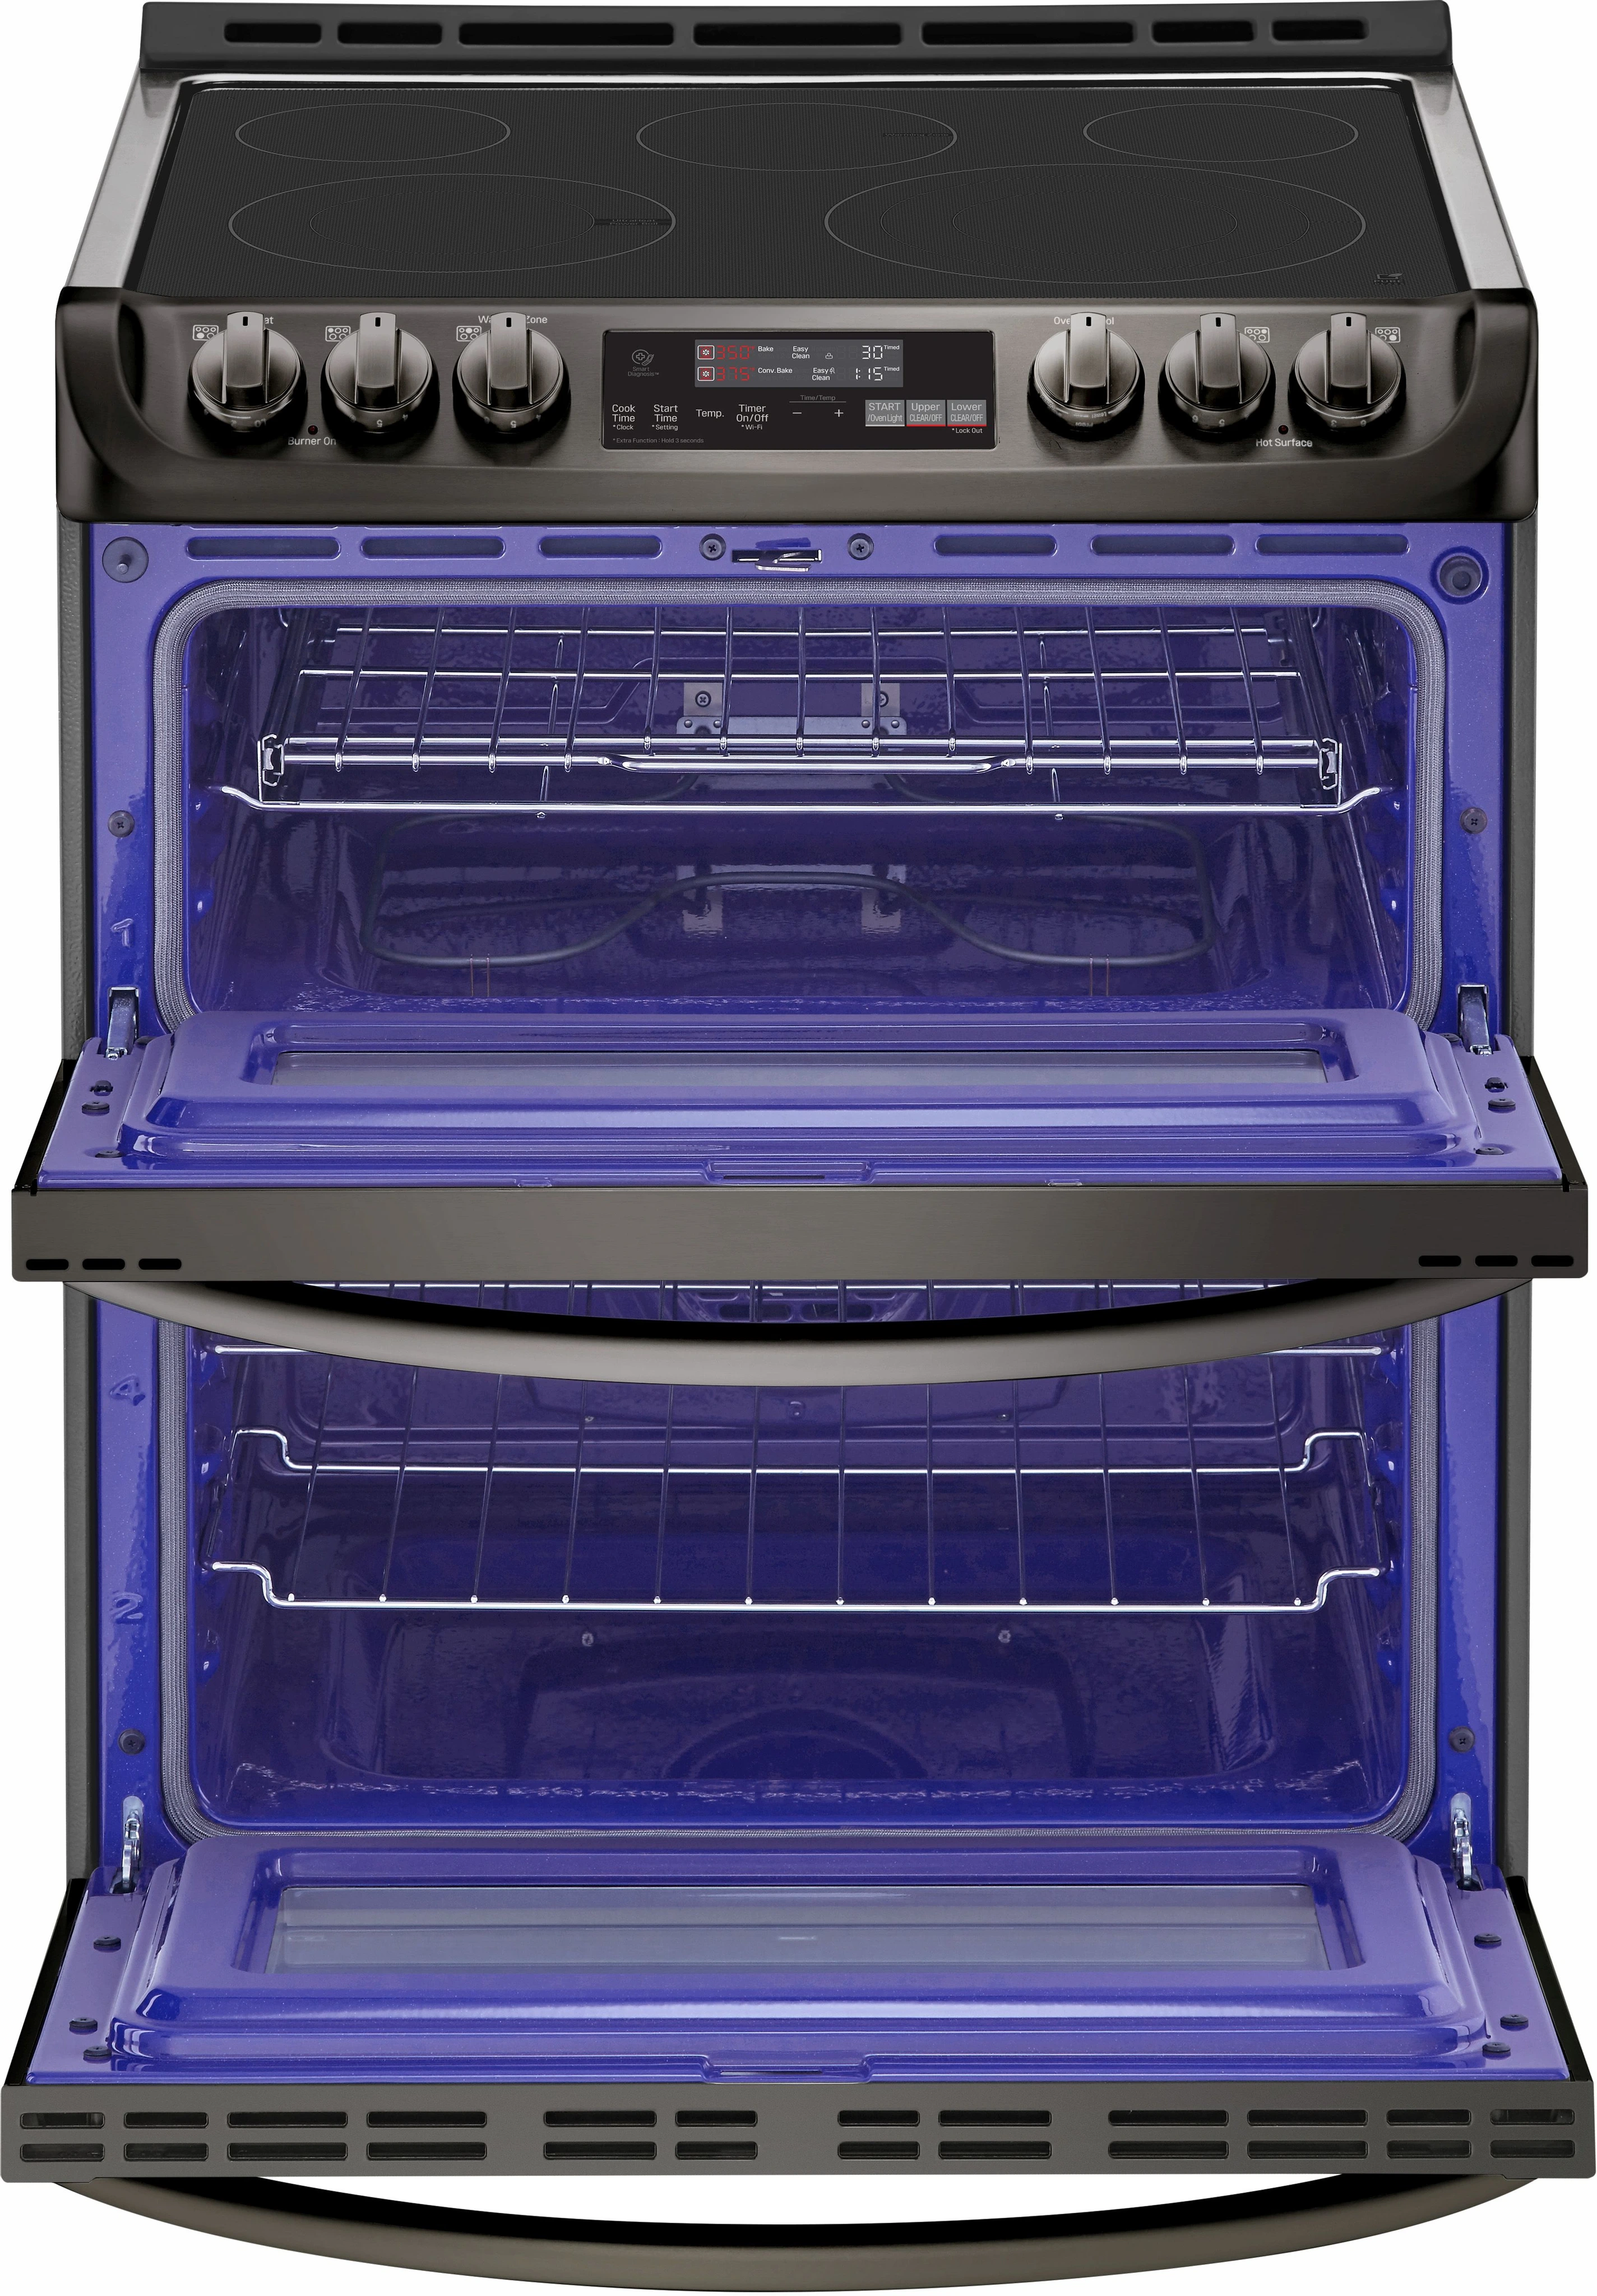 https://d12mivgeuoigbq.cloudfront.net/assets/blog/blog_appliances/LG-30in-Black-Stainless-Steel-Slide-In-Electric-Range-Double%20Oven.webp